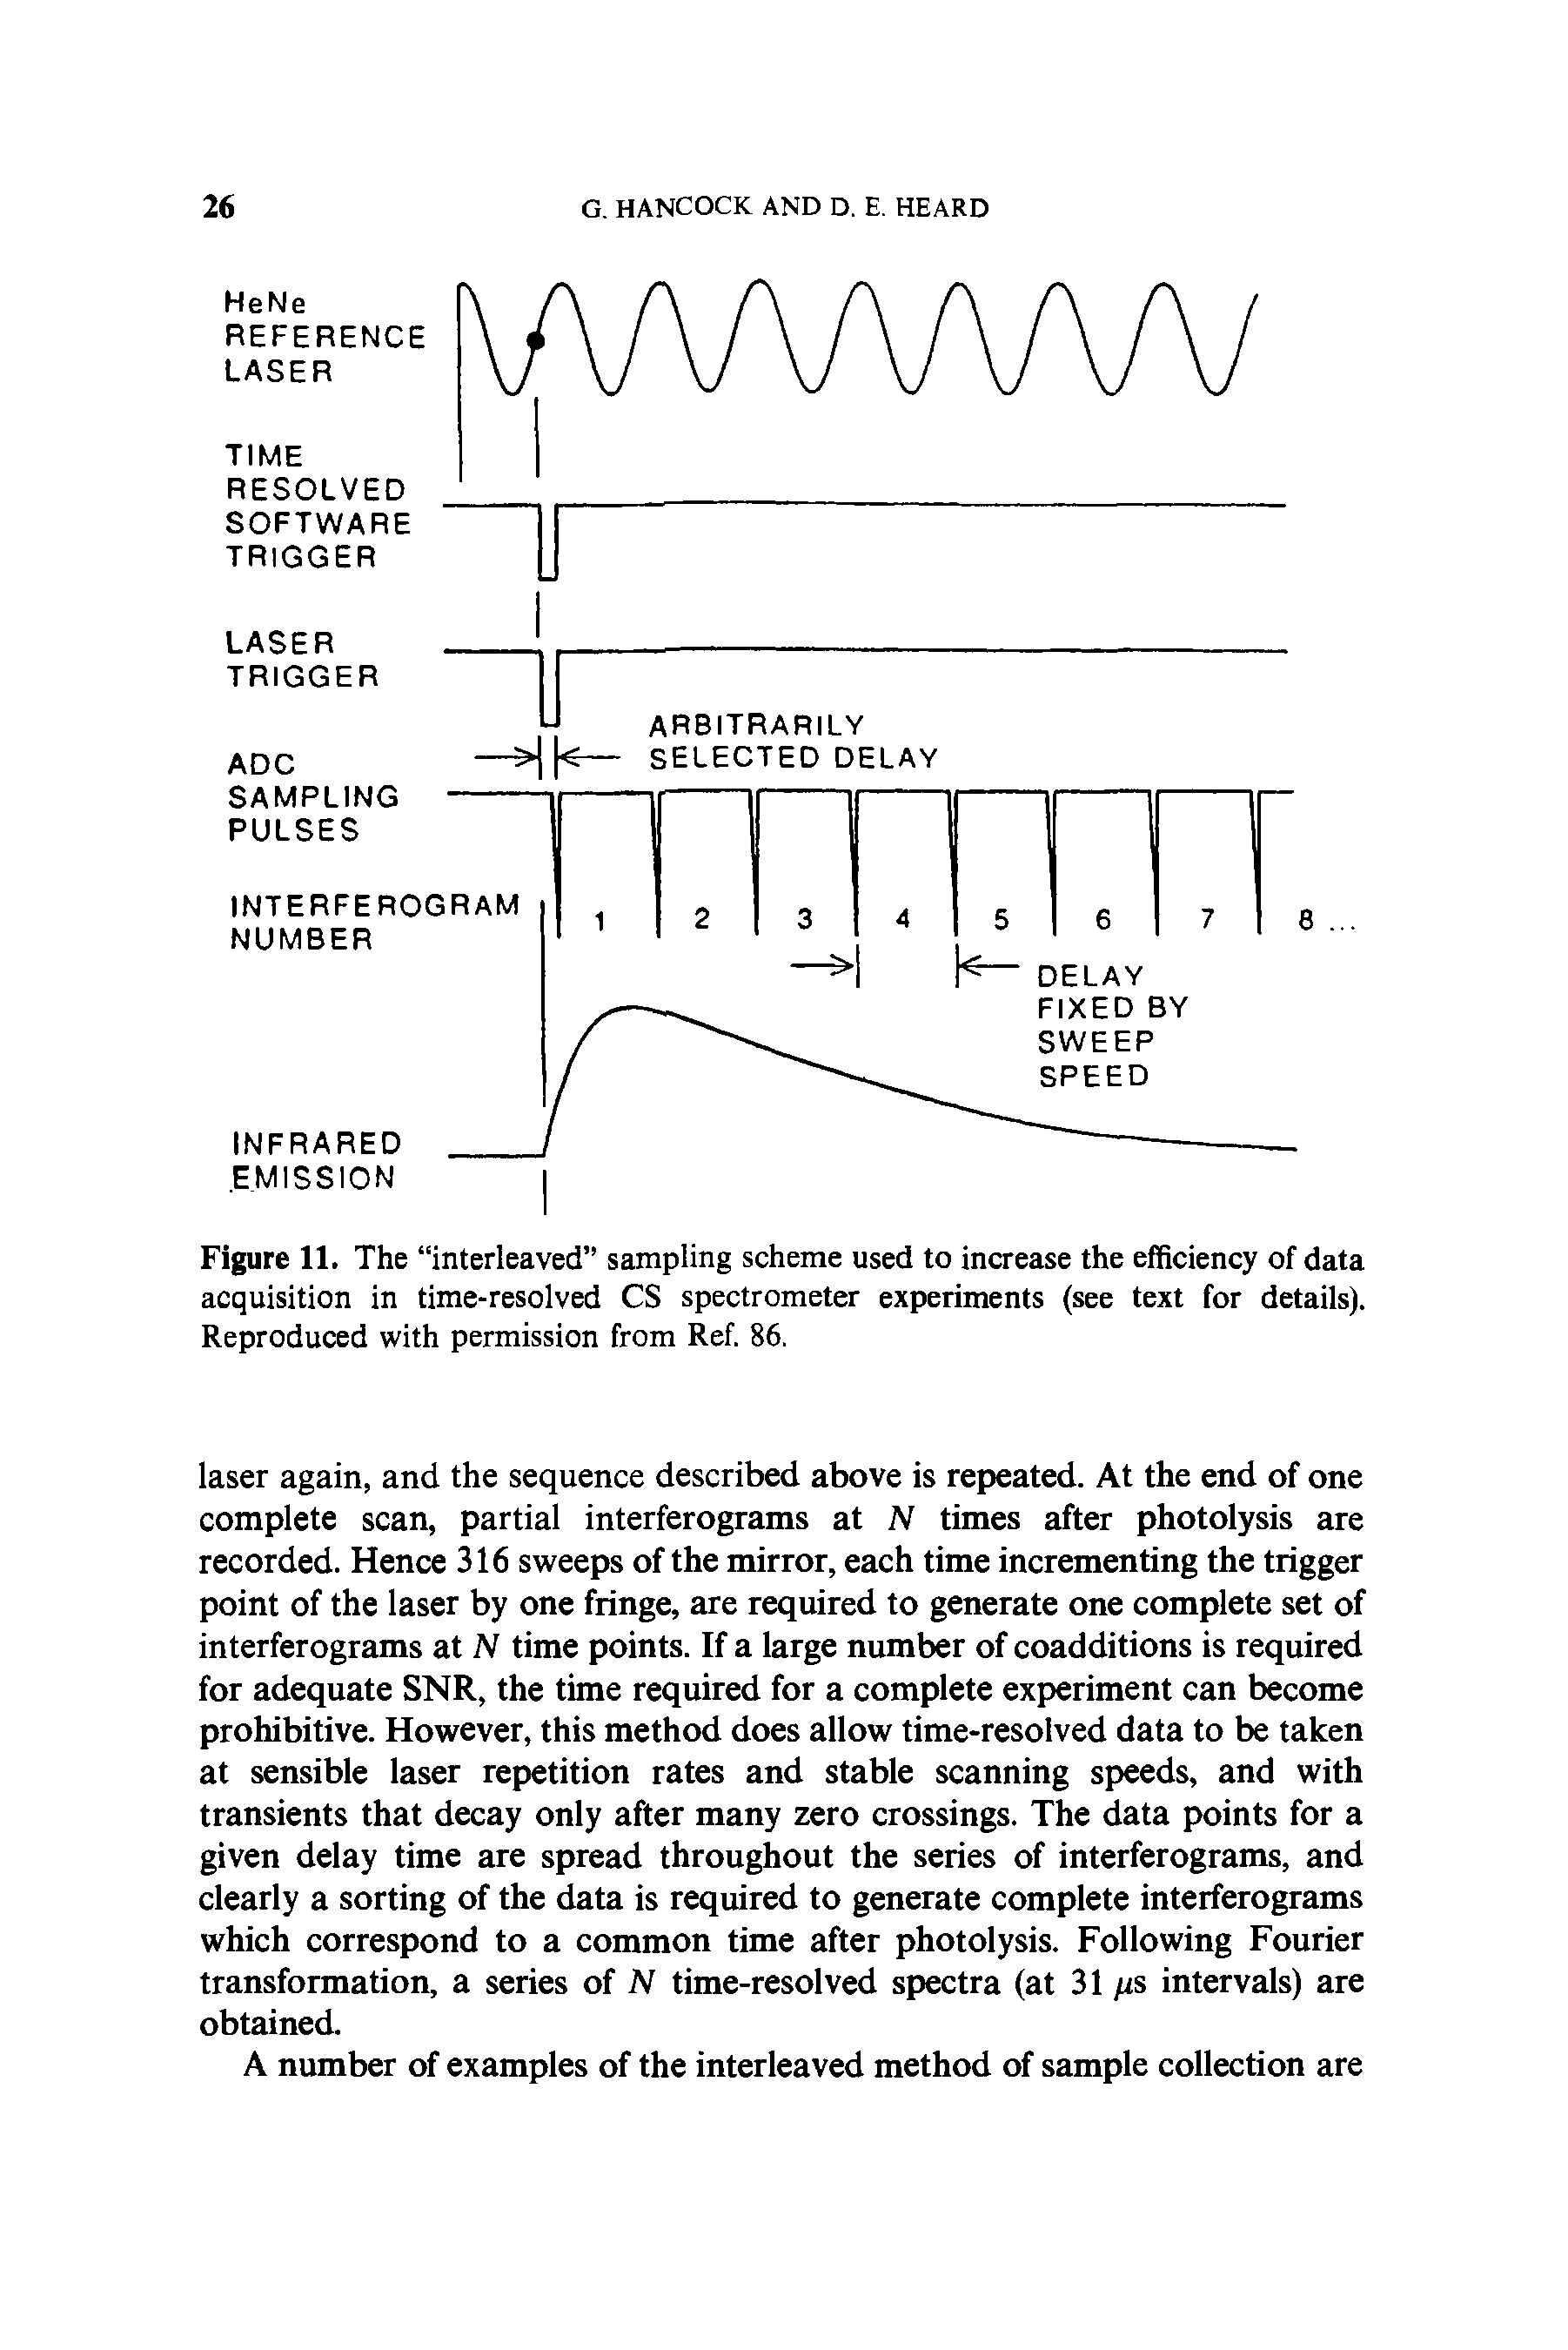 Figure 11. The interleaved sampling scheme used to increase the efficiency of data acquisition in time-resolved CS spectrometer experiments (see text for details). Reproduced with permission from Ref. 86.